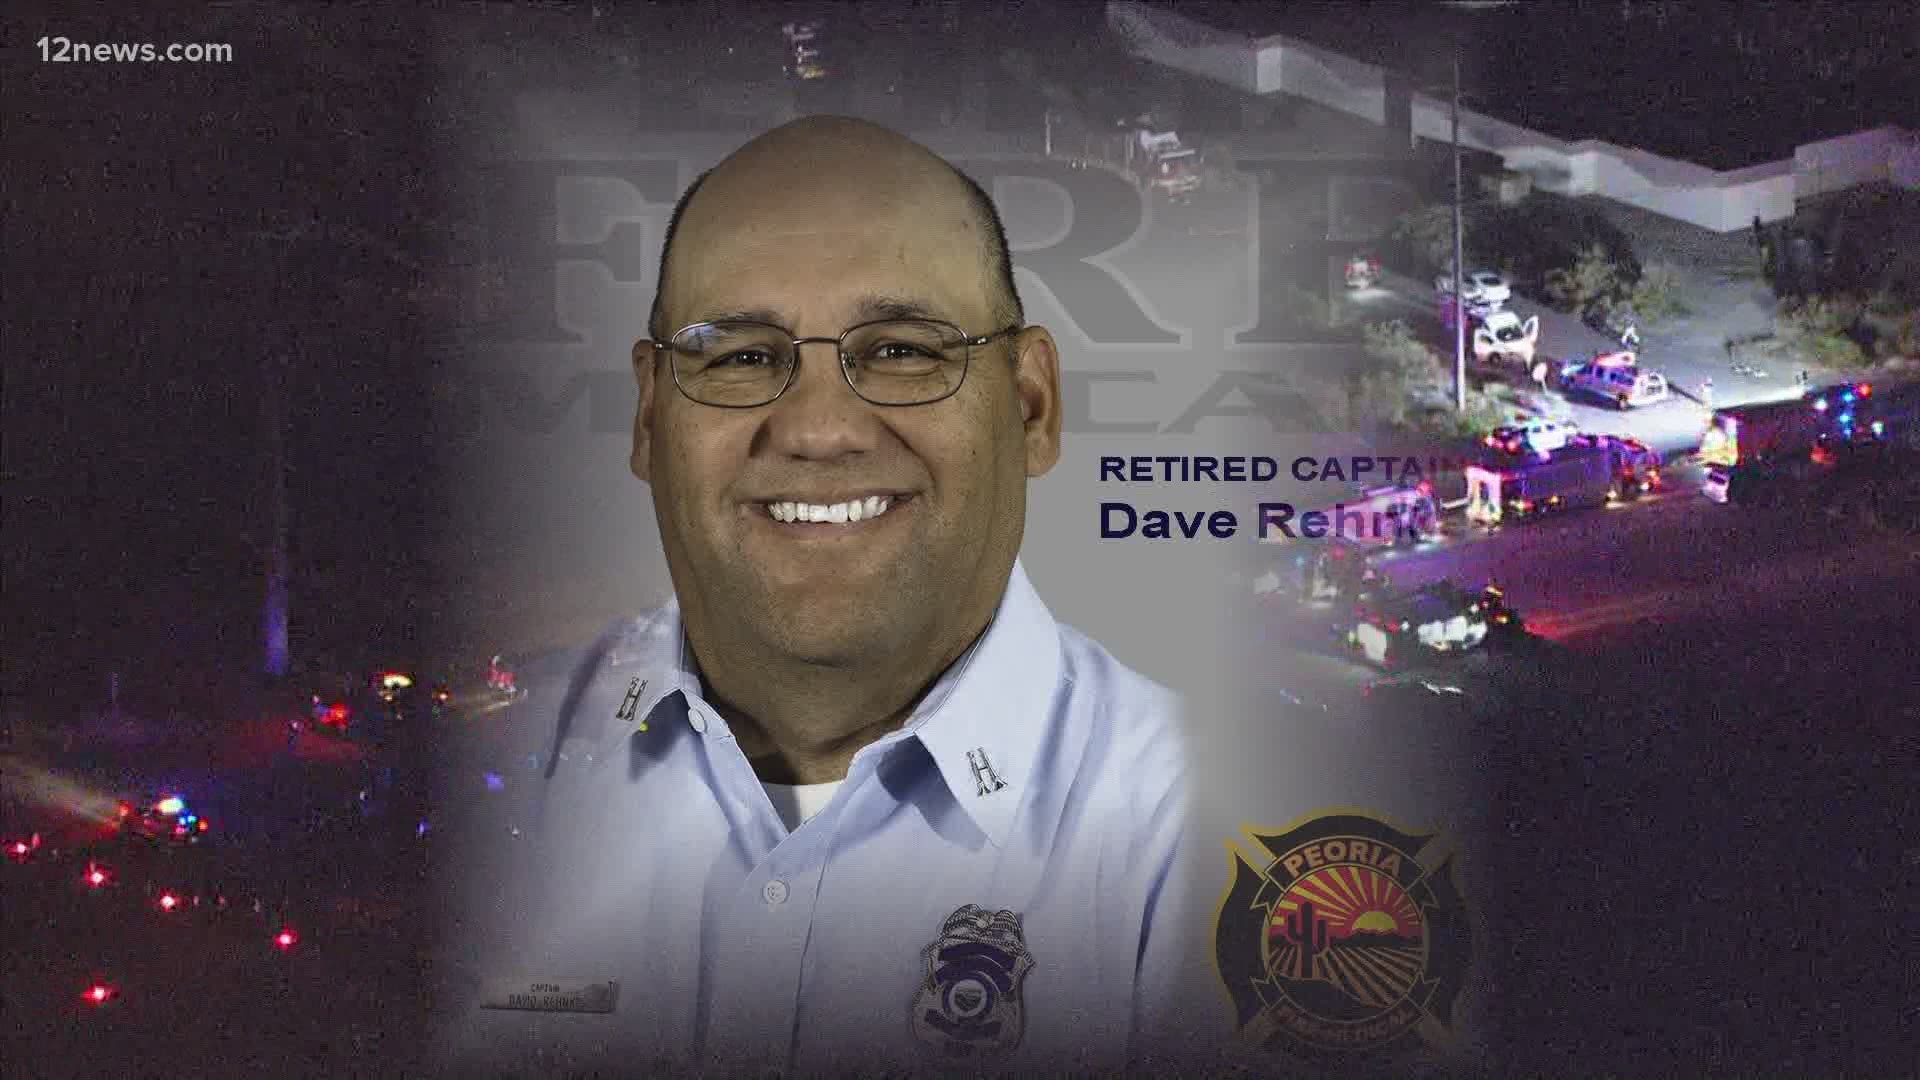 Capt. Dave Rehnke lost his 10-year battle with cancer and leaves behind his wife of 30 years, two kids and a community of lives he helped.